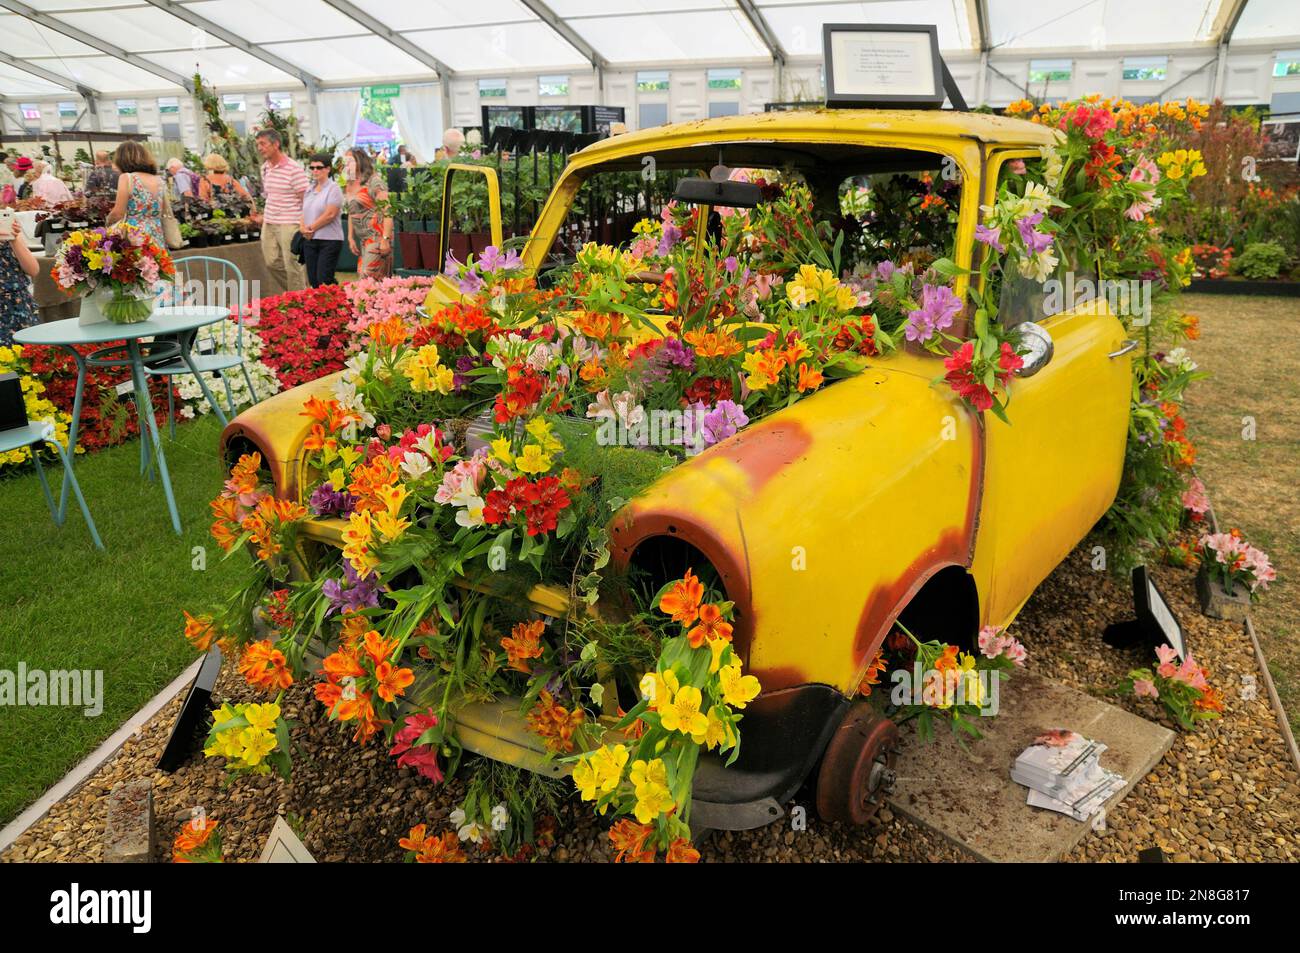 Eye-catching floral exhibit of Alstroemeria flowers in car body of rusted yellow mini, Floral Marquee, RHS Hampton Court Palace Garden Festival, UK Stock Photo